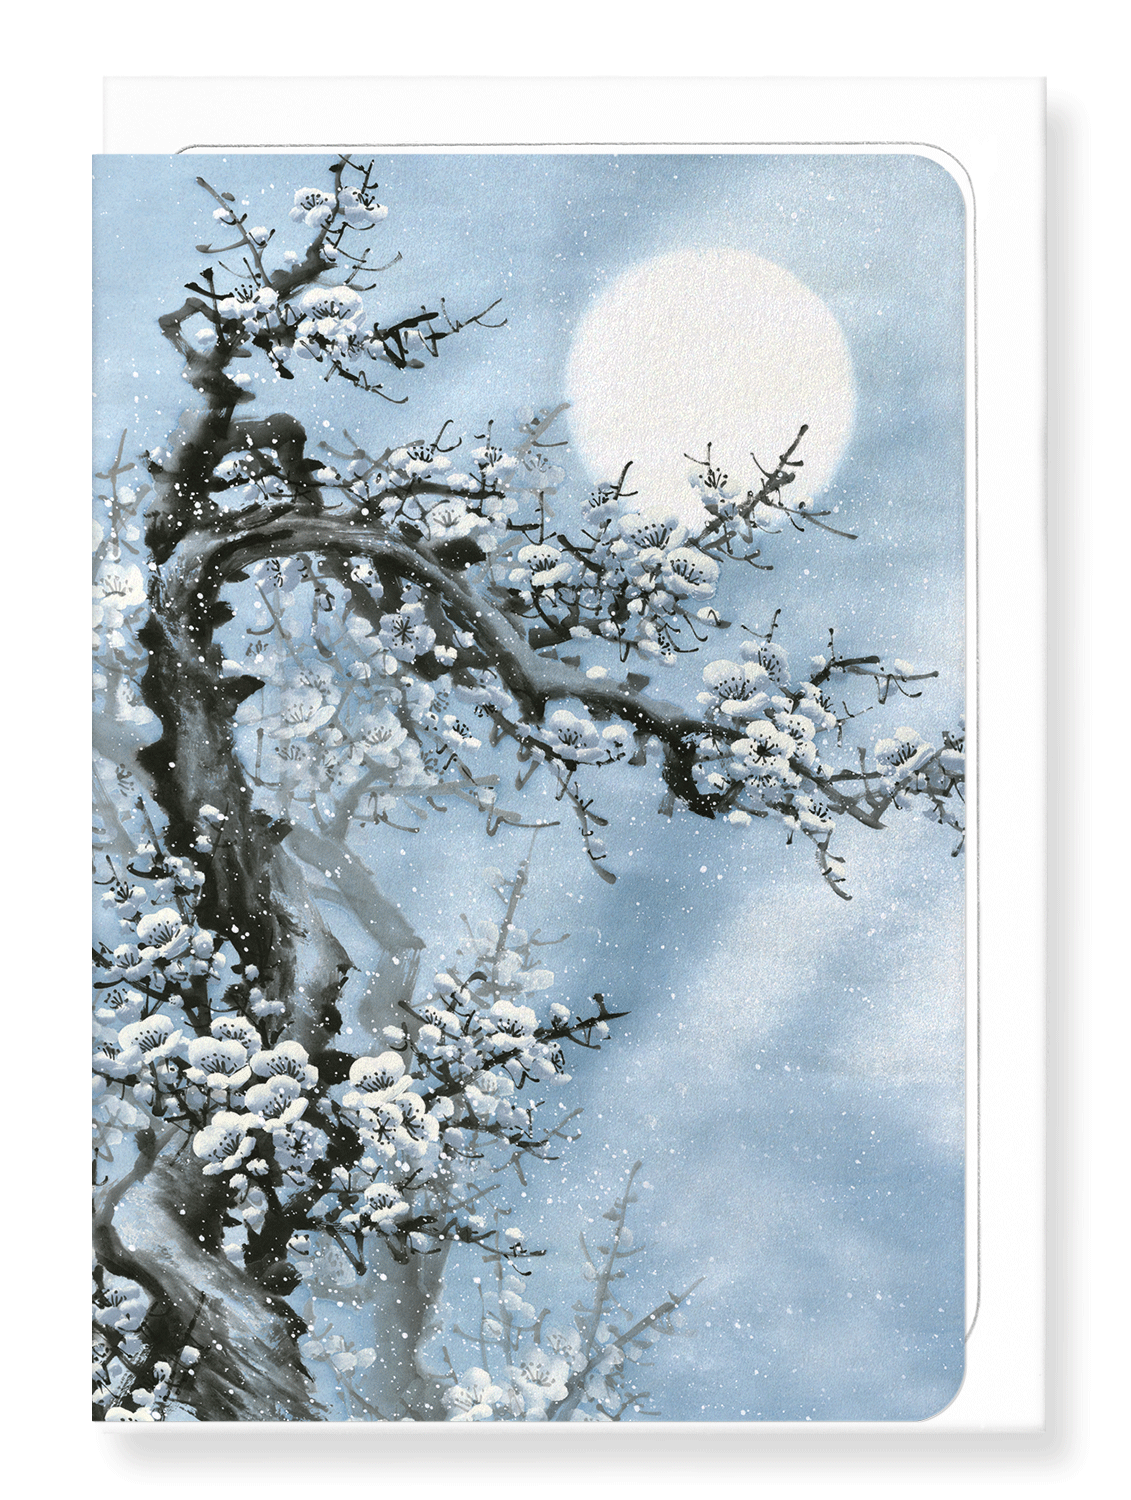 Ezen Designs - Plum blossom in blue moon - Greeting Card - Front